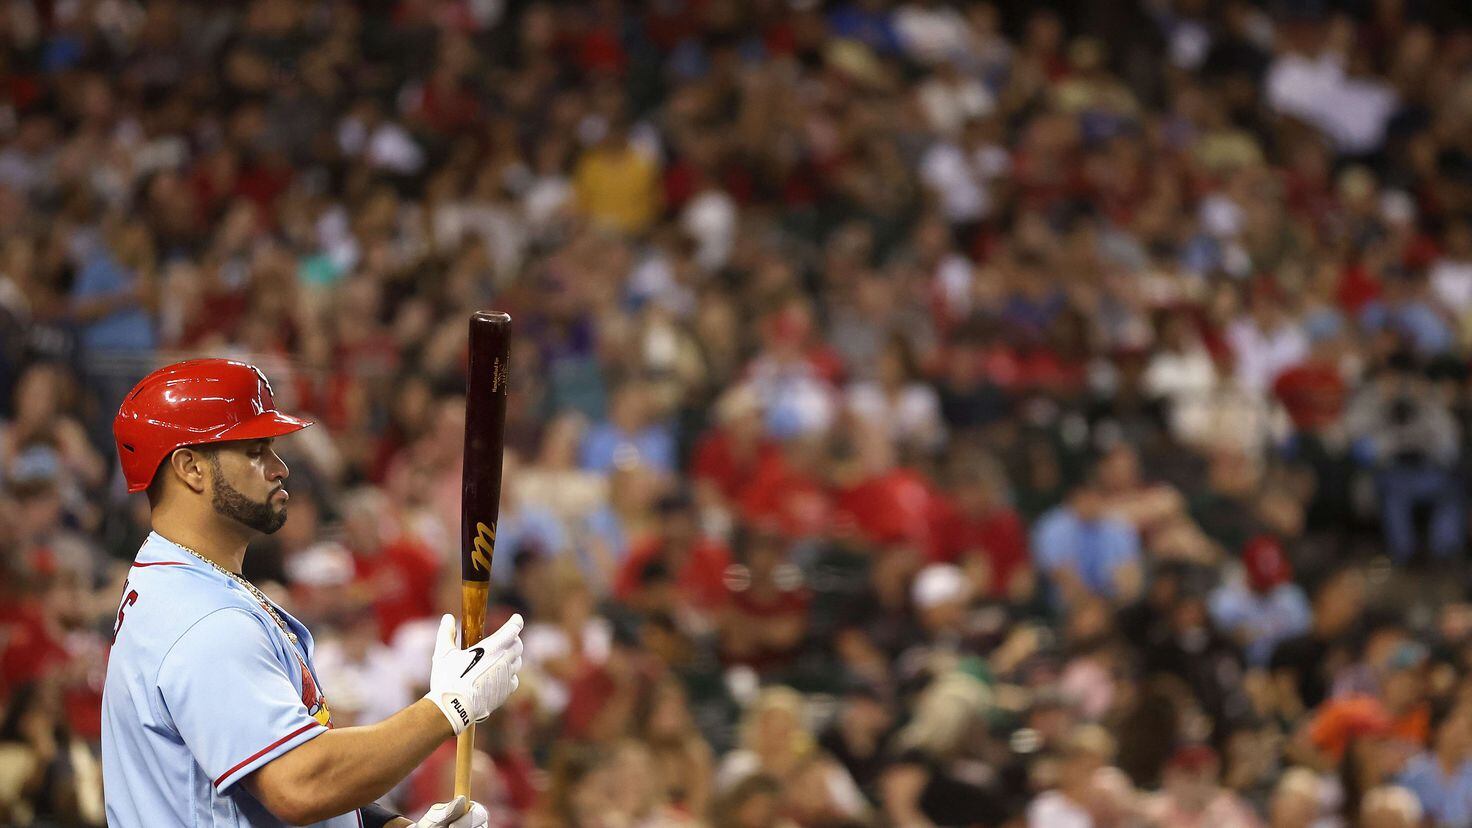 HISTORY! Albert Pujols becomes just the FOURTH member of the 700